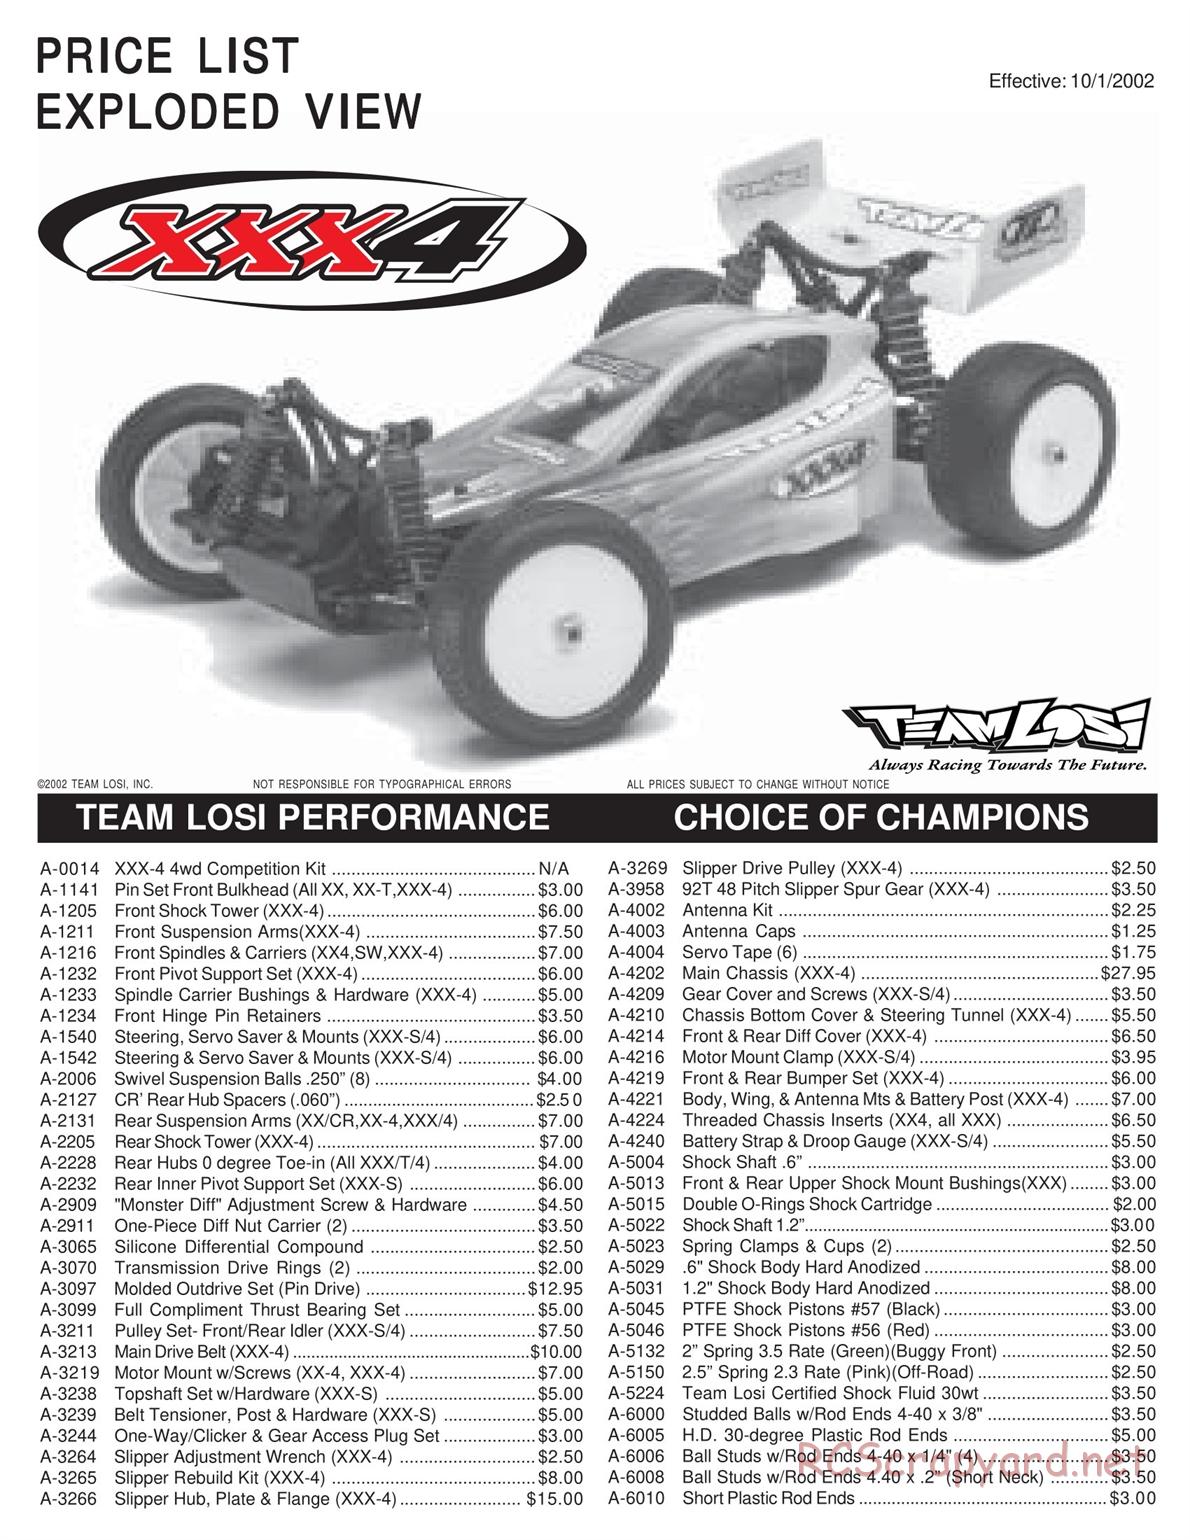 Team Losi - XXX4 - Manual - Page 1